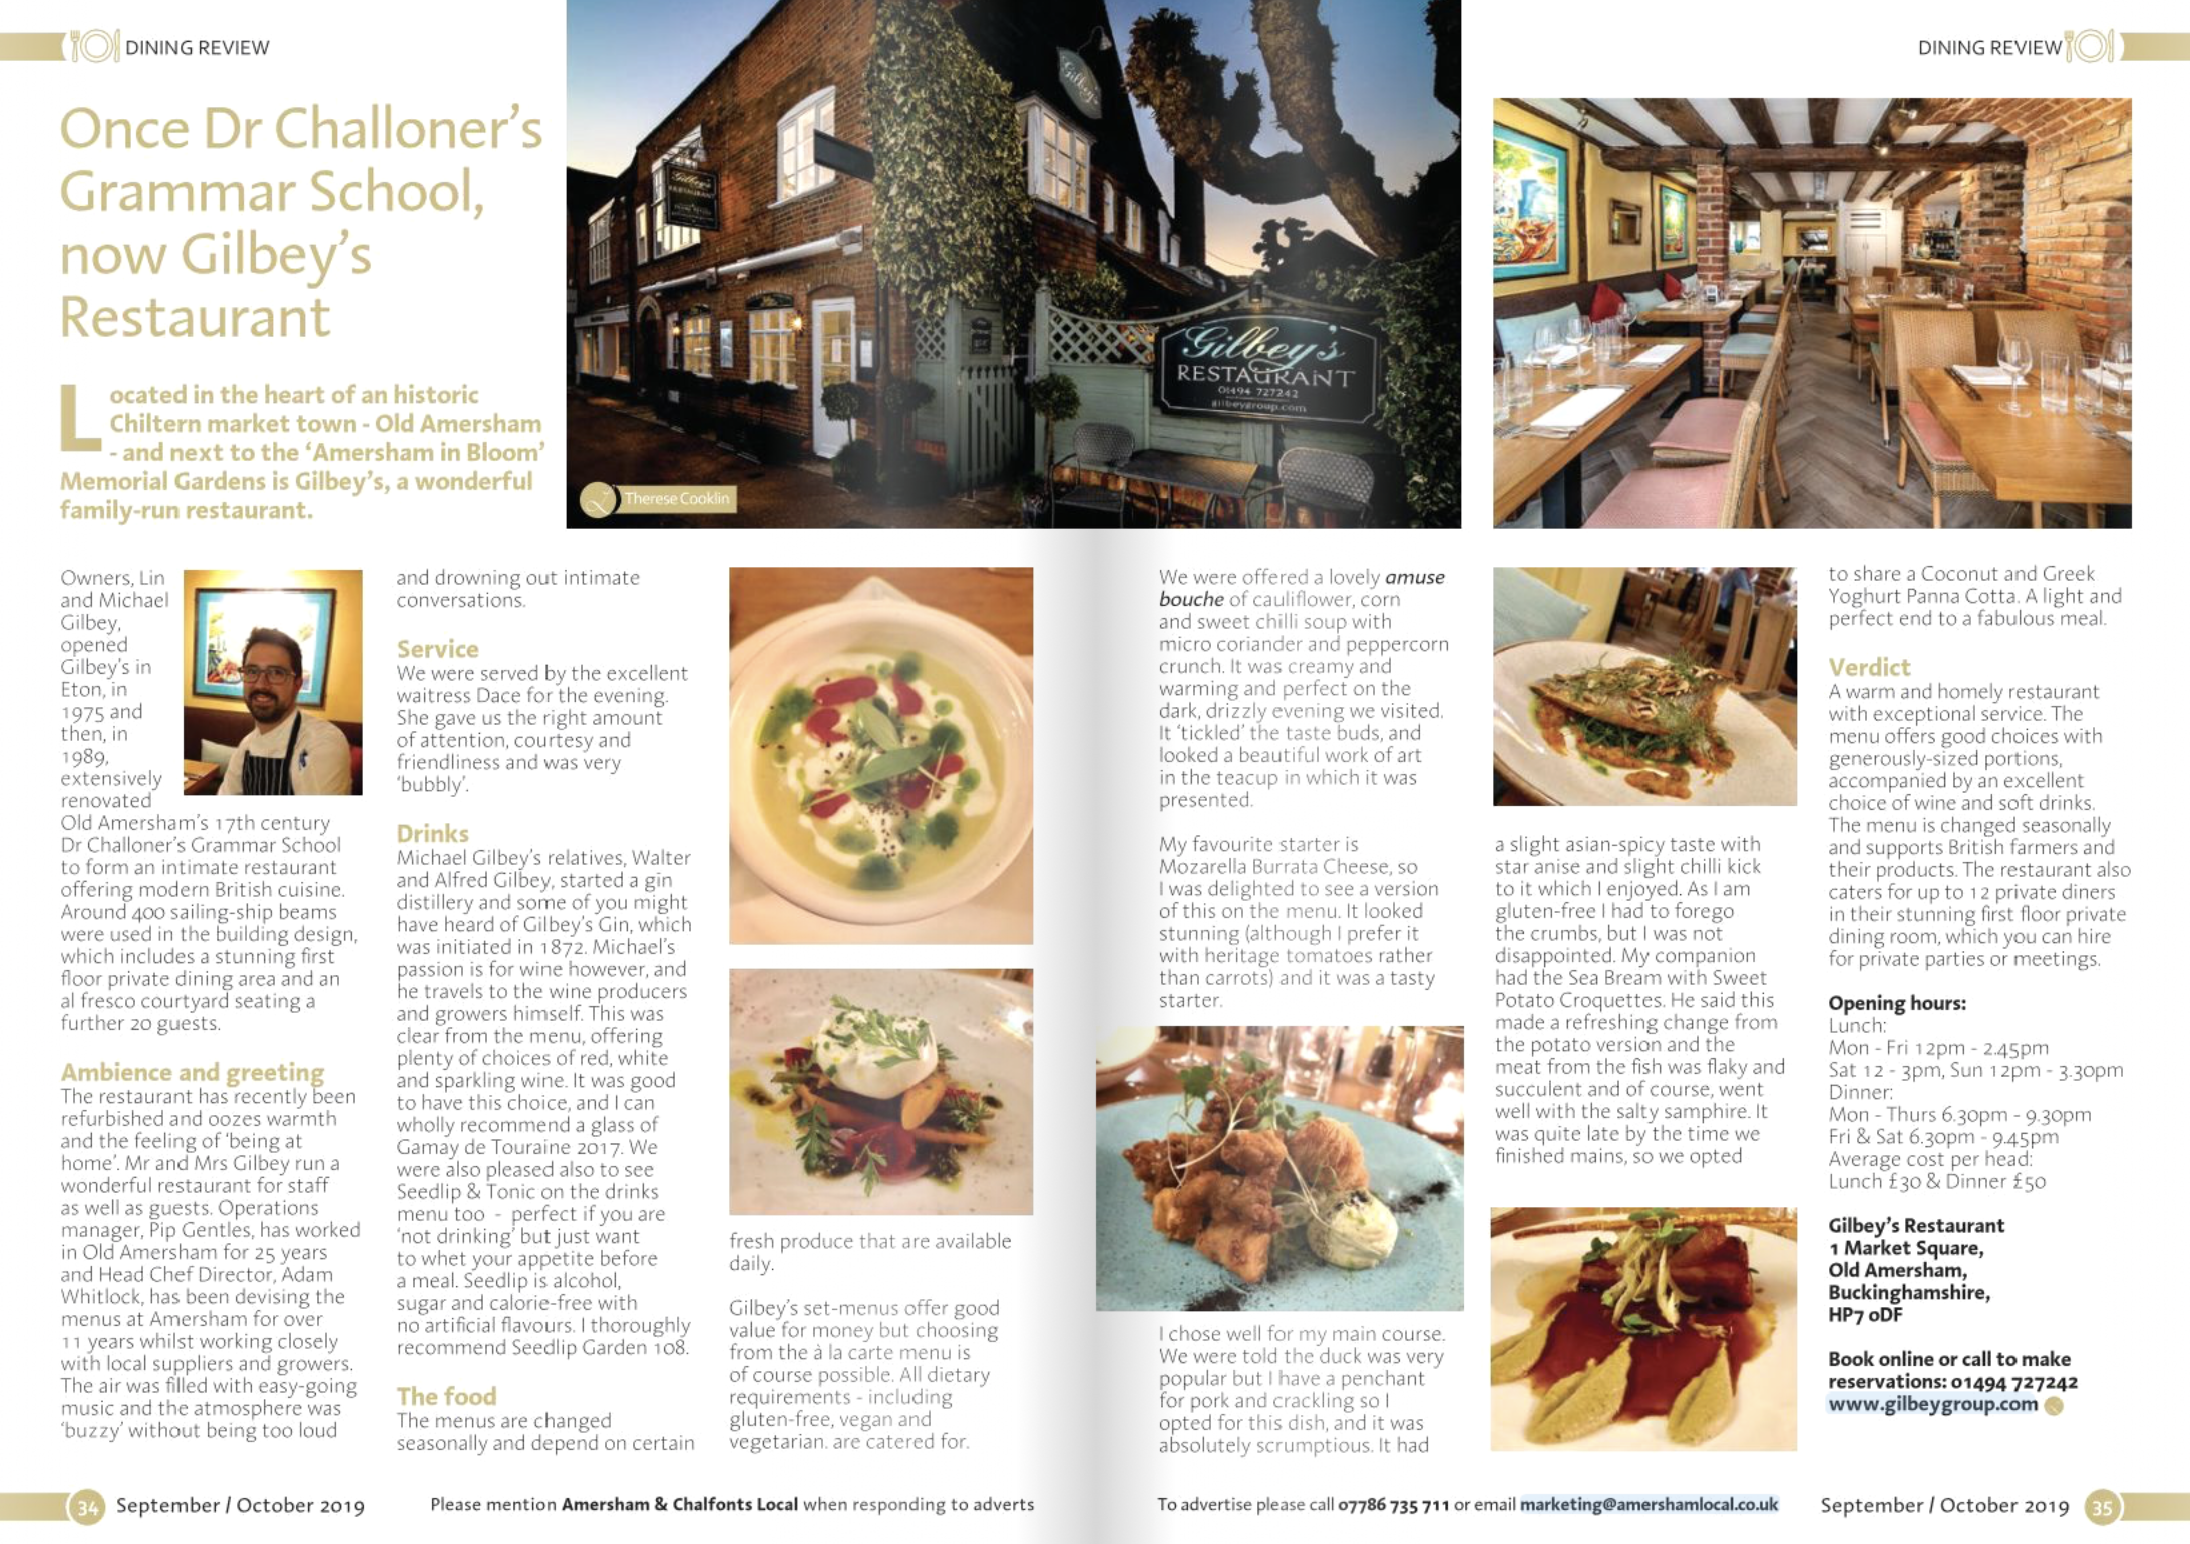 gilbeys-dining-review-amersham-chalfonts-together-community